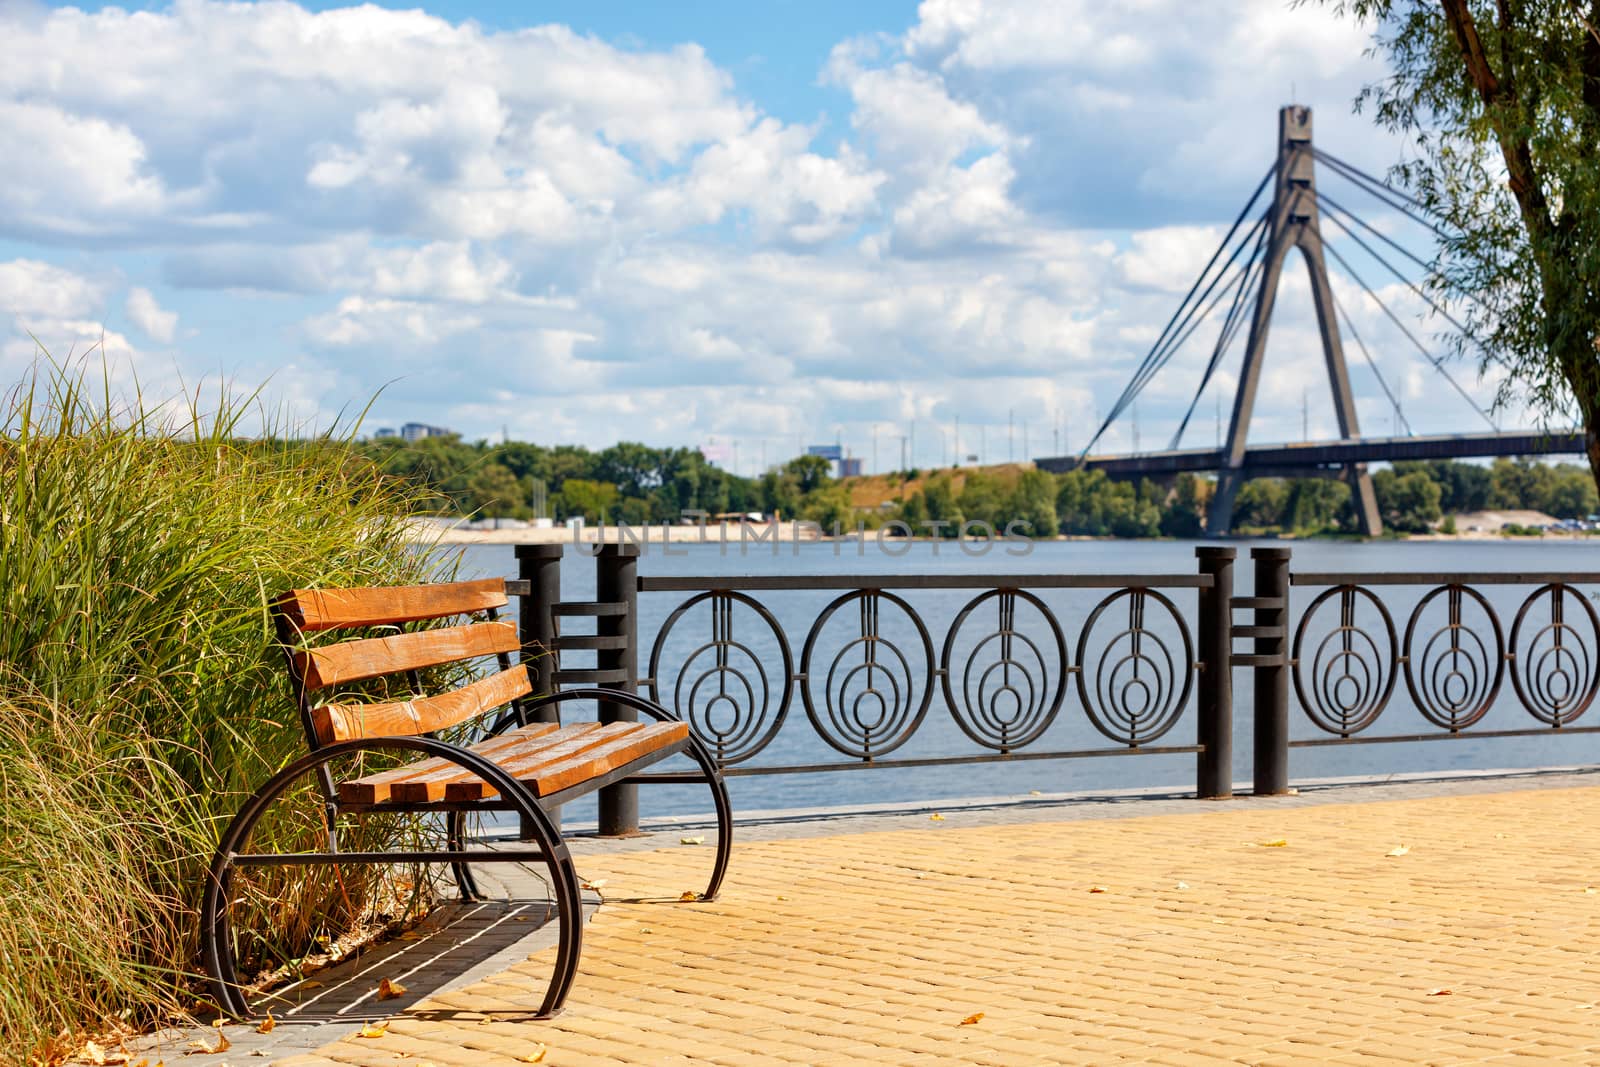 A wooden bench on the embankment of the Dnipro River against the background of yellow paving slabs and the northern bridge over the river in blur. by Sergii